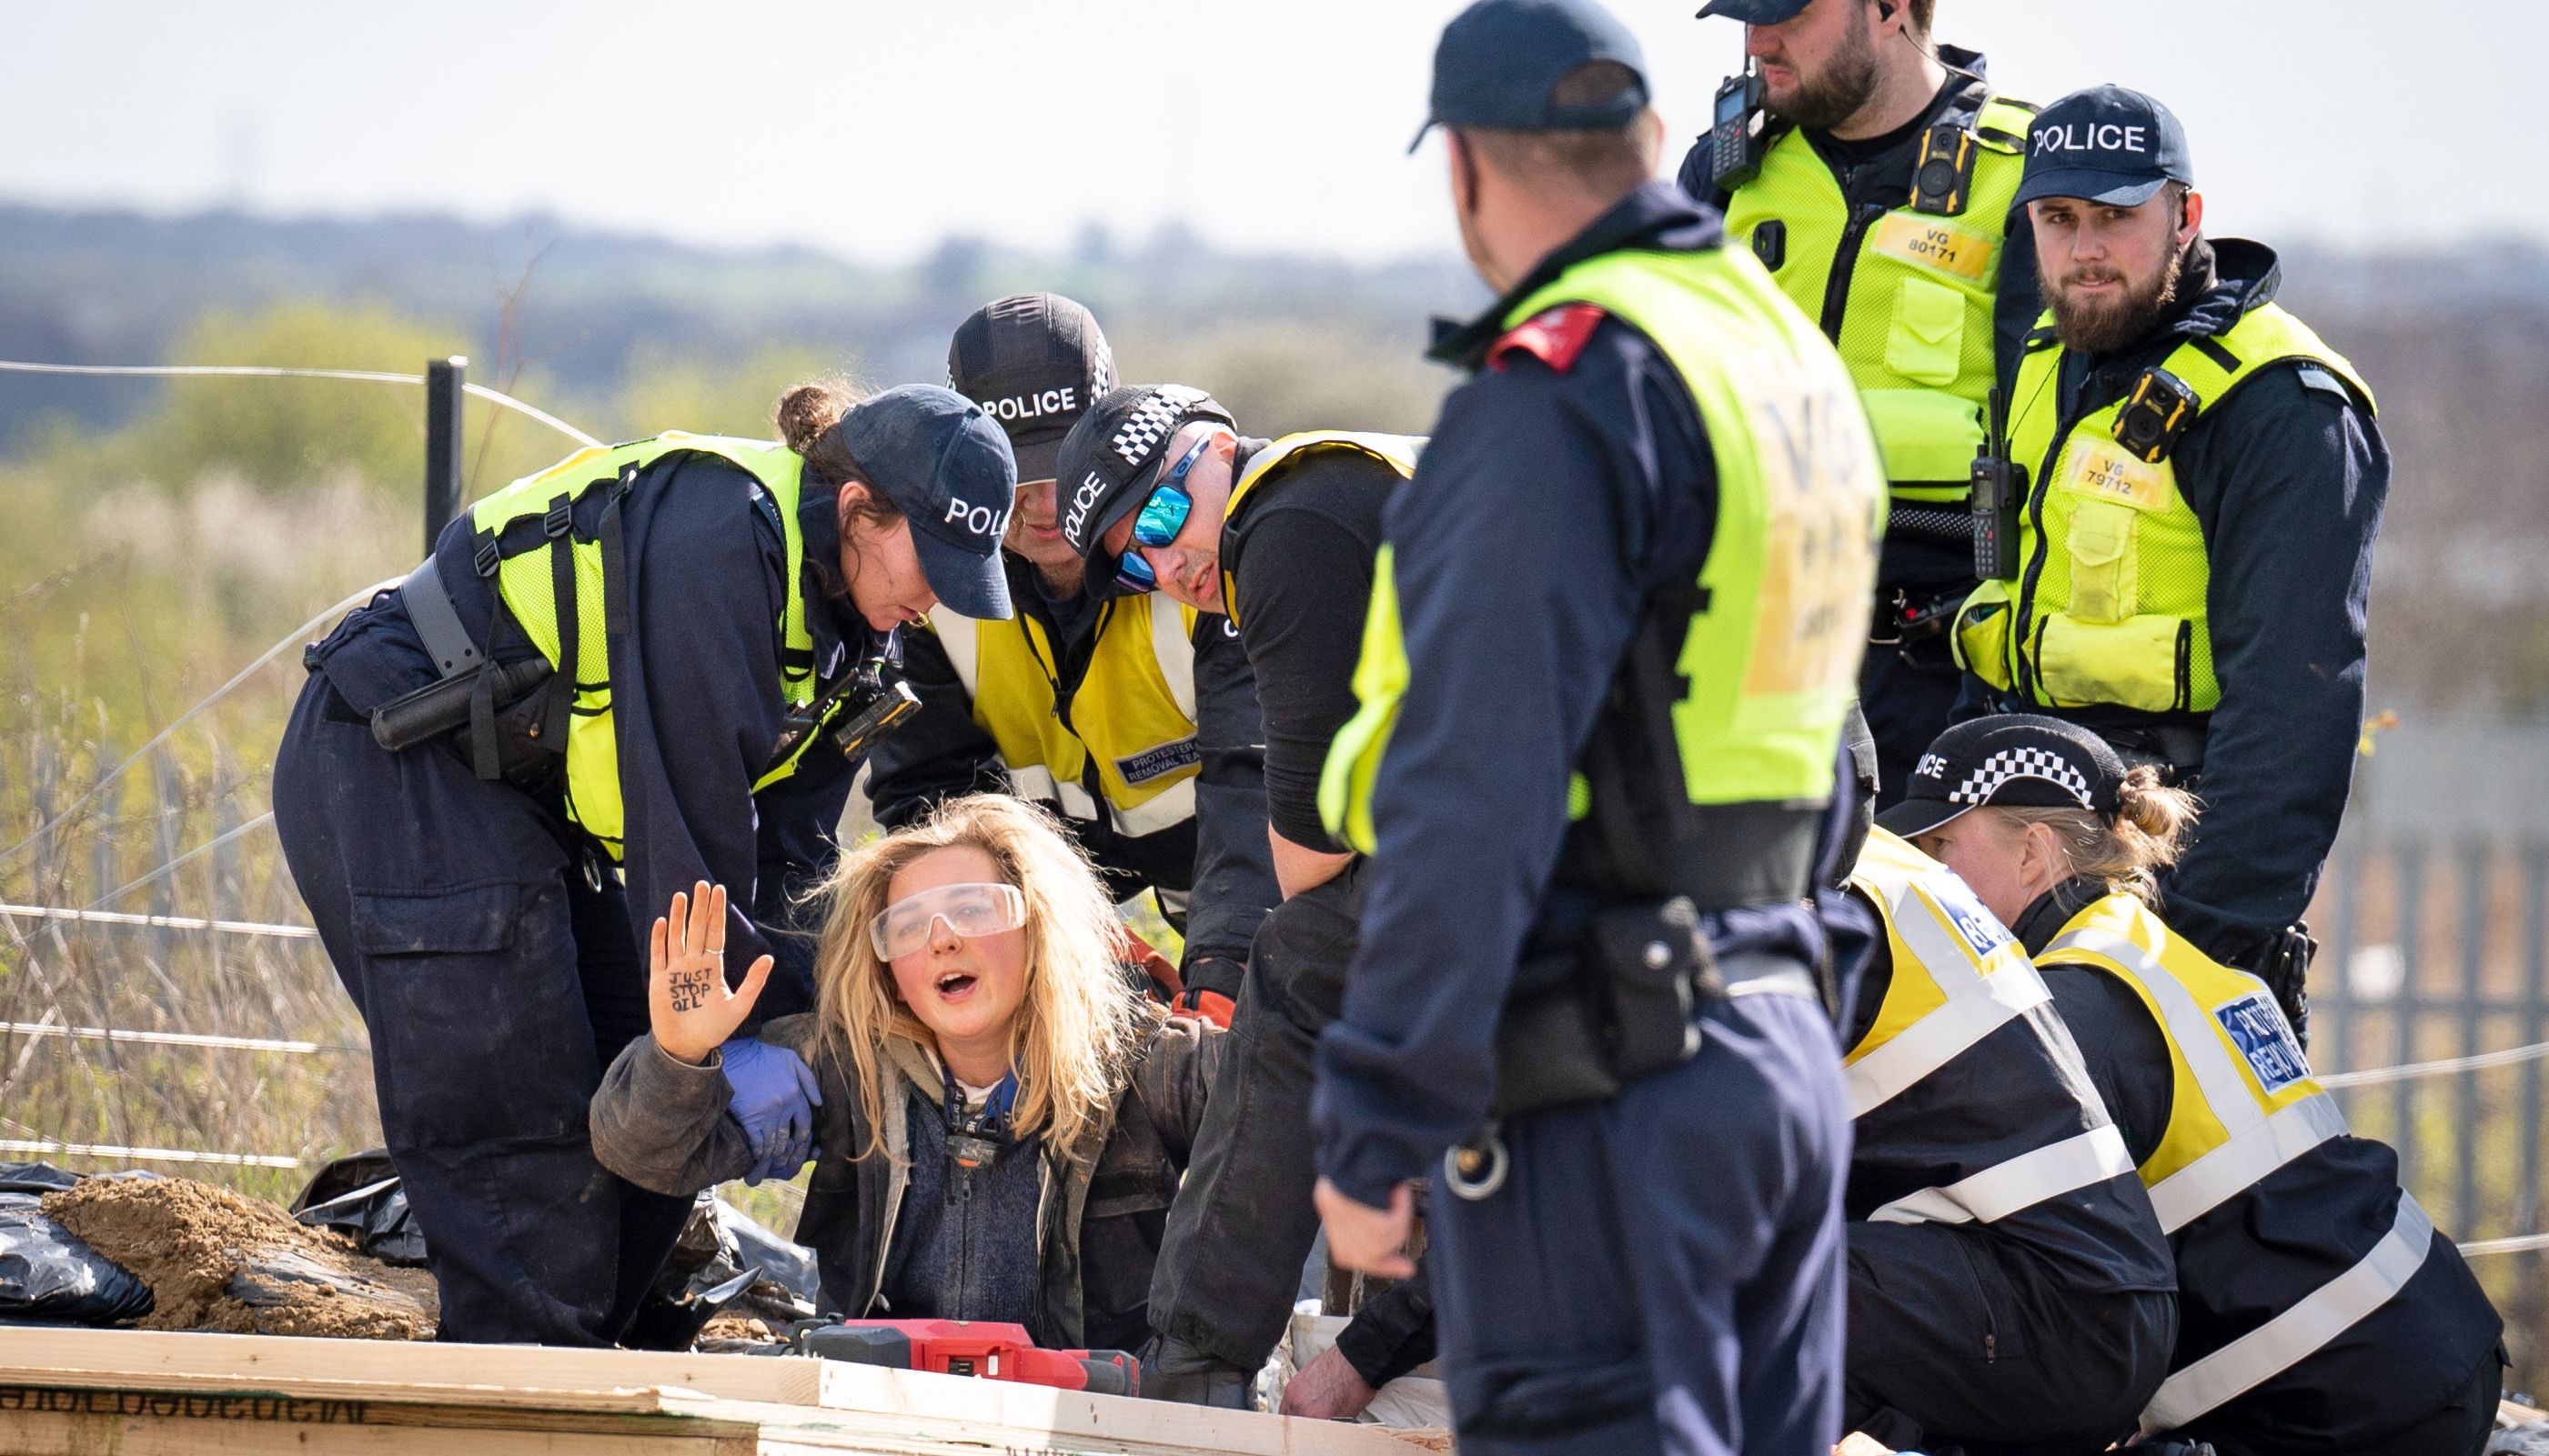 Police officers from the Protester Removal Team work to free a Just Stop Oil activist who is part of a blockade at the Titan Truck Park in Grays, Essex. Picture date: Saturday April 2, 2022.